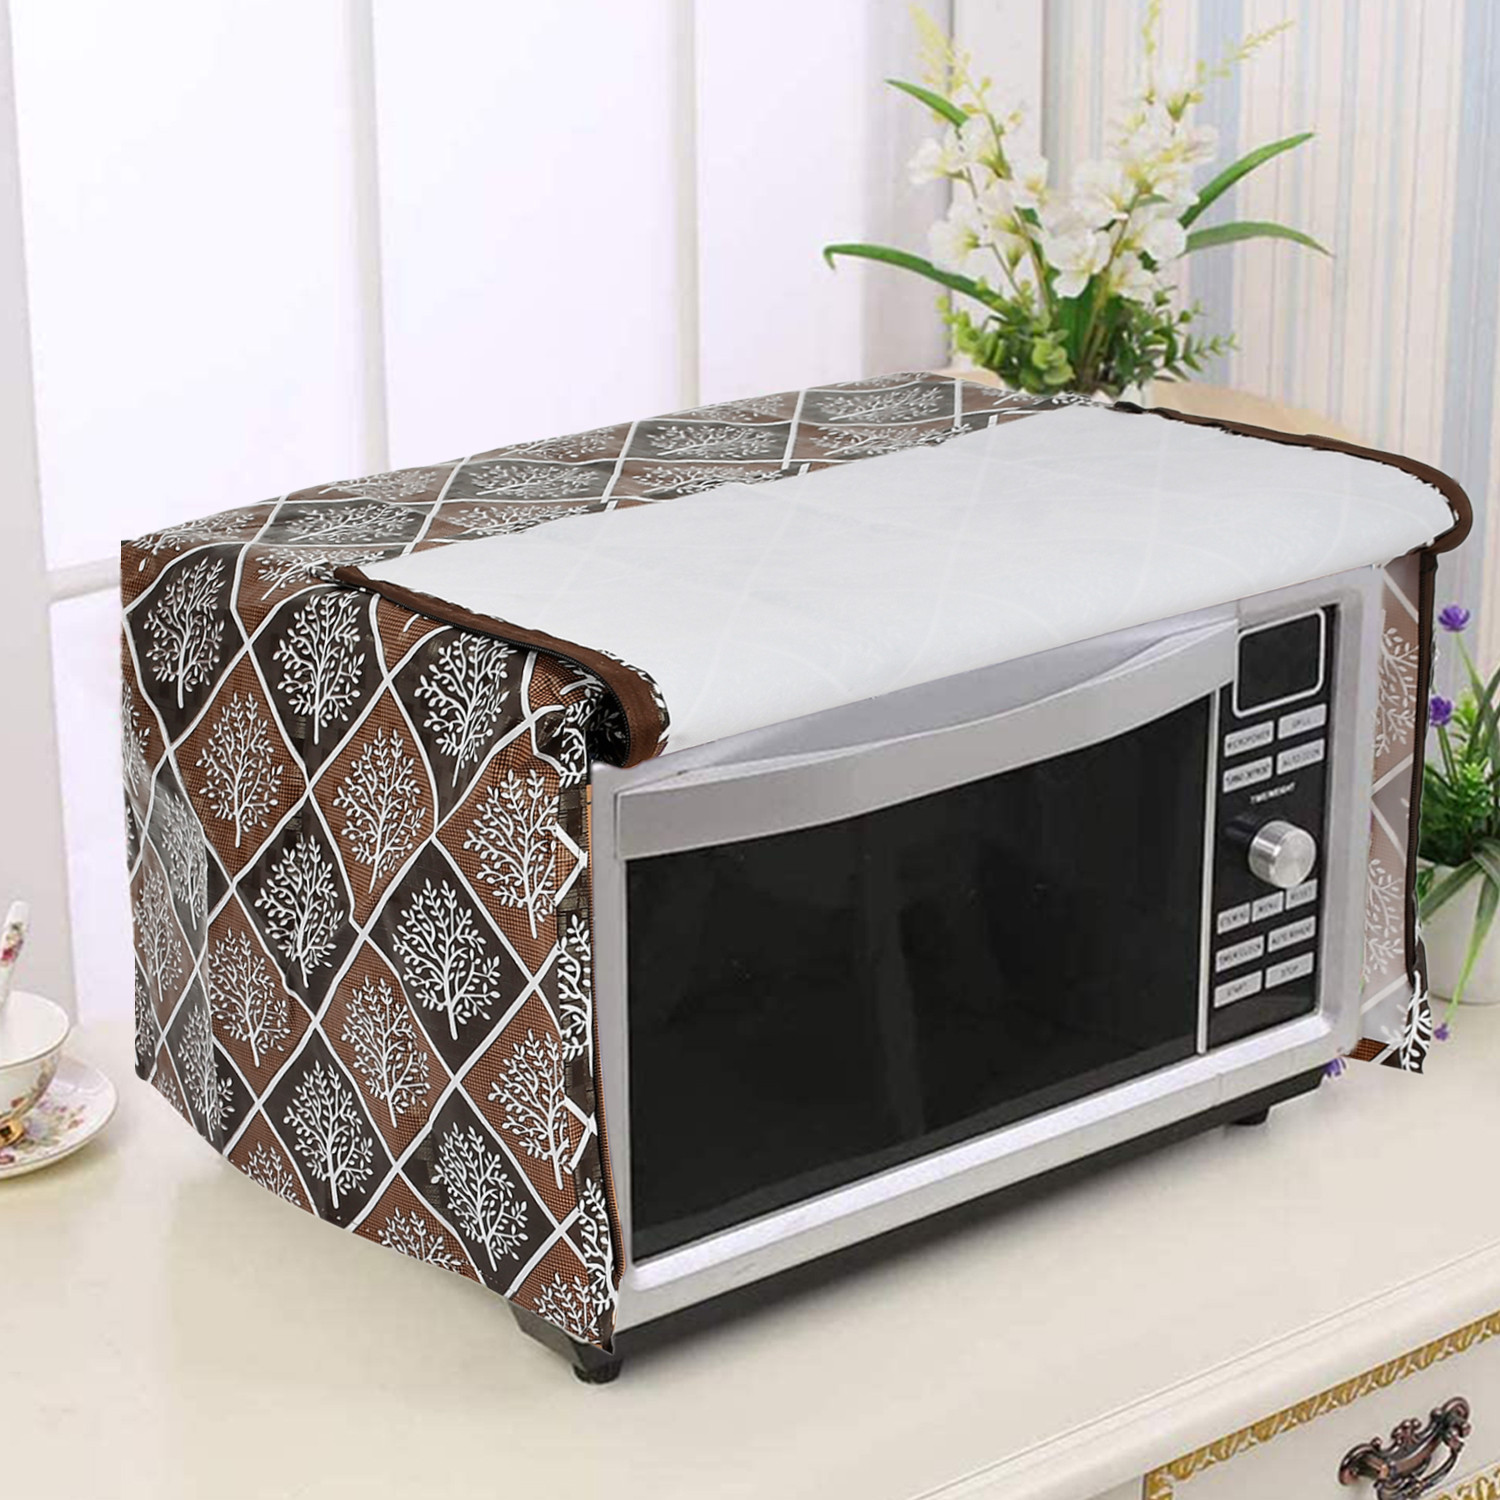 Kuber Industries PVC Tree Printed Microwave Oven Cover, Dustproof Machine Protector Cover,23 Ltr. (Coffee)